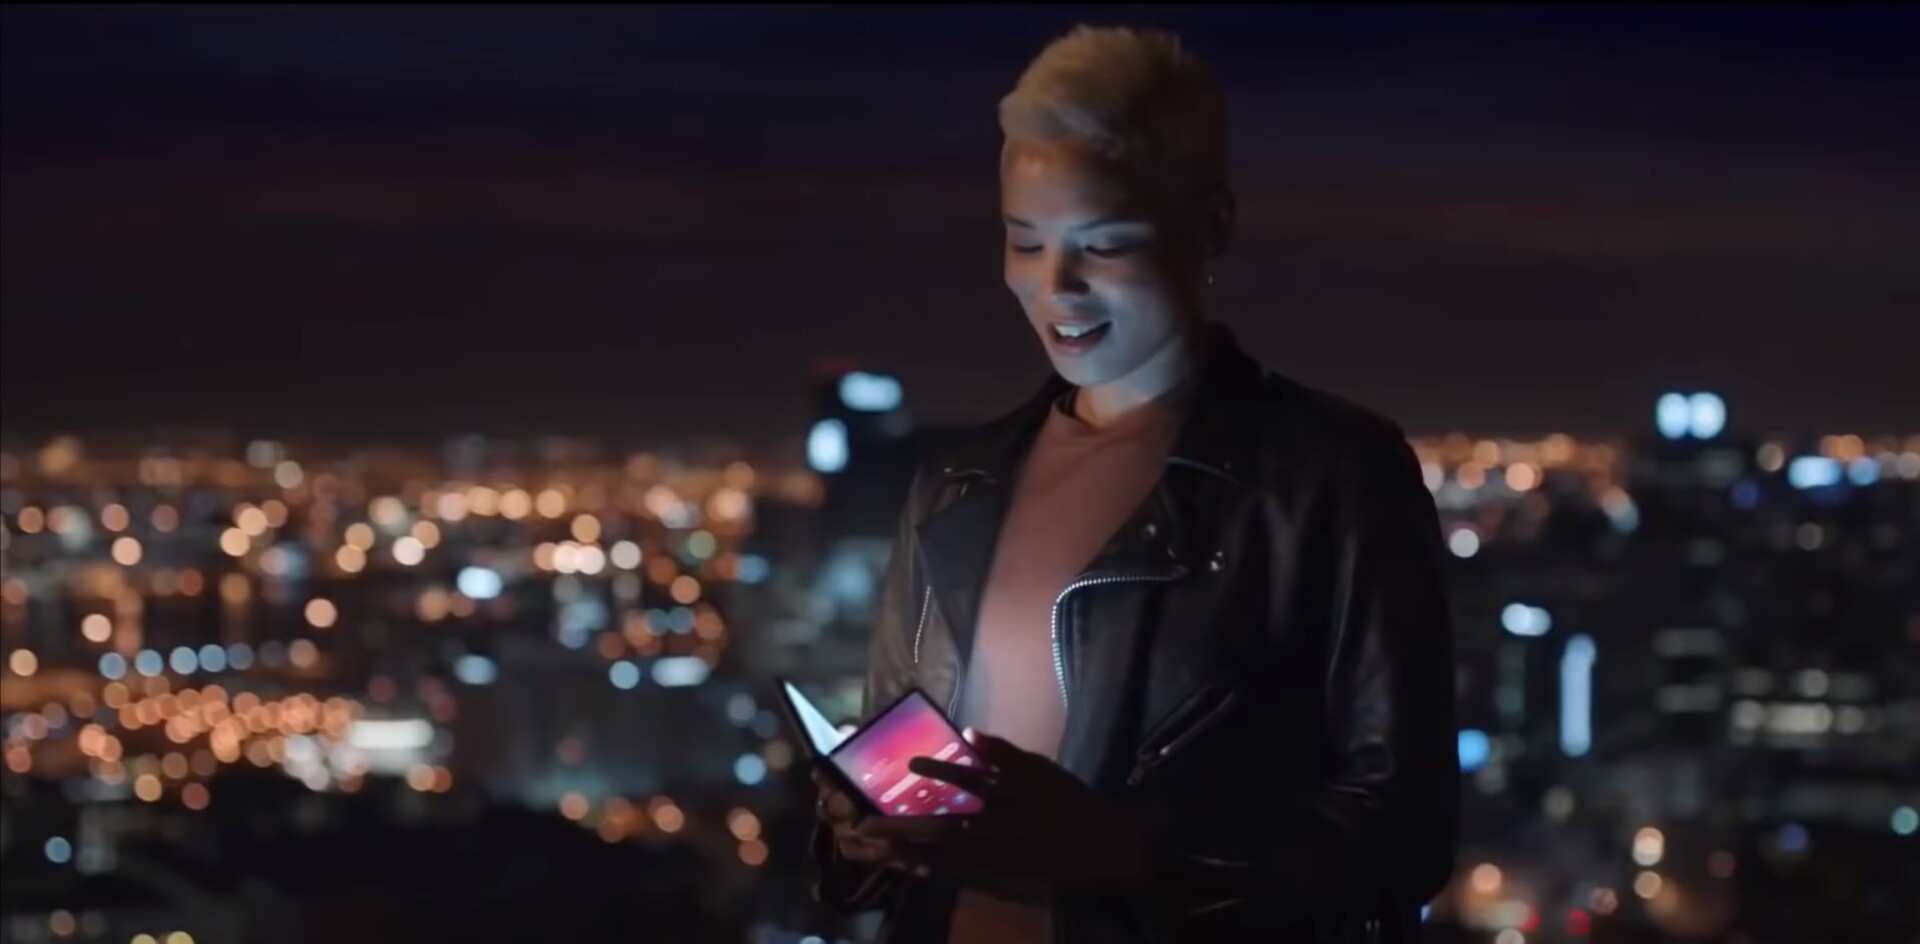 A woman holding a folding phone in front of a city at night.